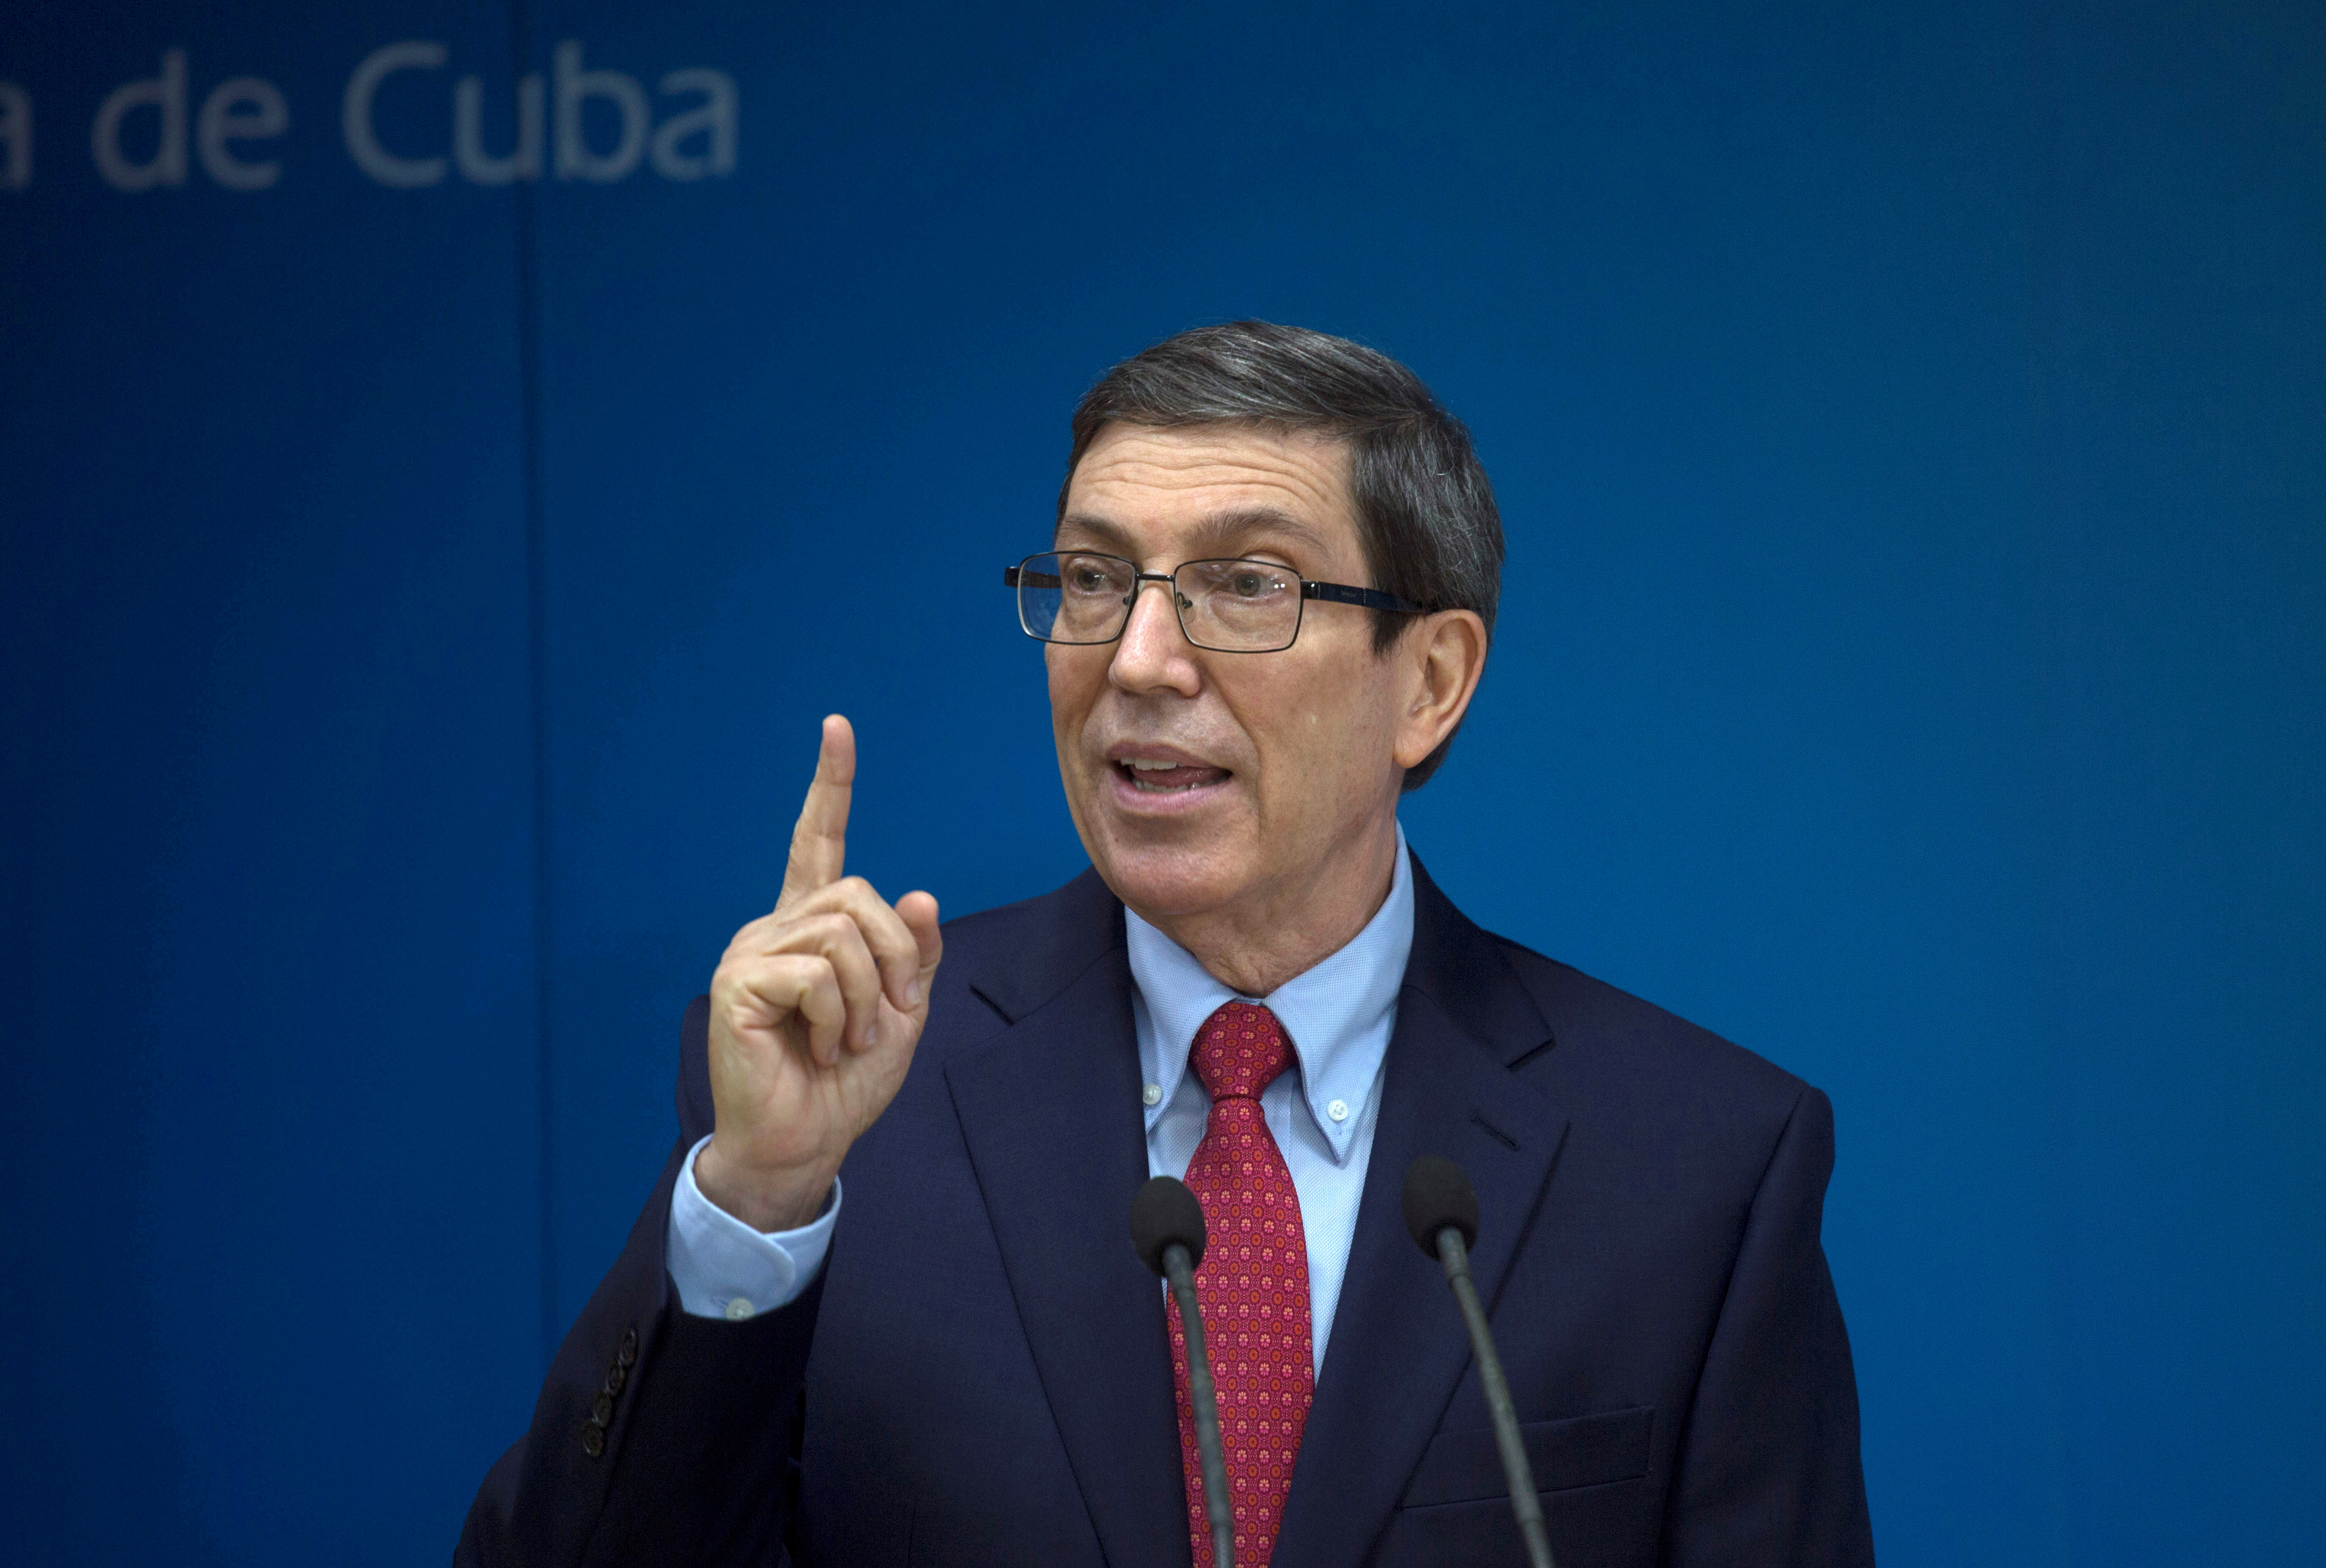 Cuba's Foreign Minister Bruno Rodriguez Parilla speaks during a news conference in Havana, Cuba, July 13, 2021. Ismael Francisco/Pool via REUTERS/File Photo